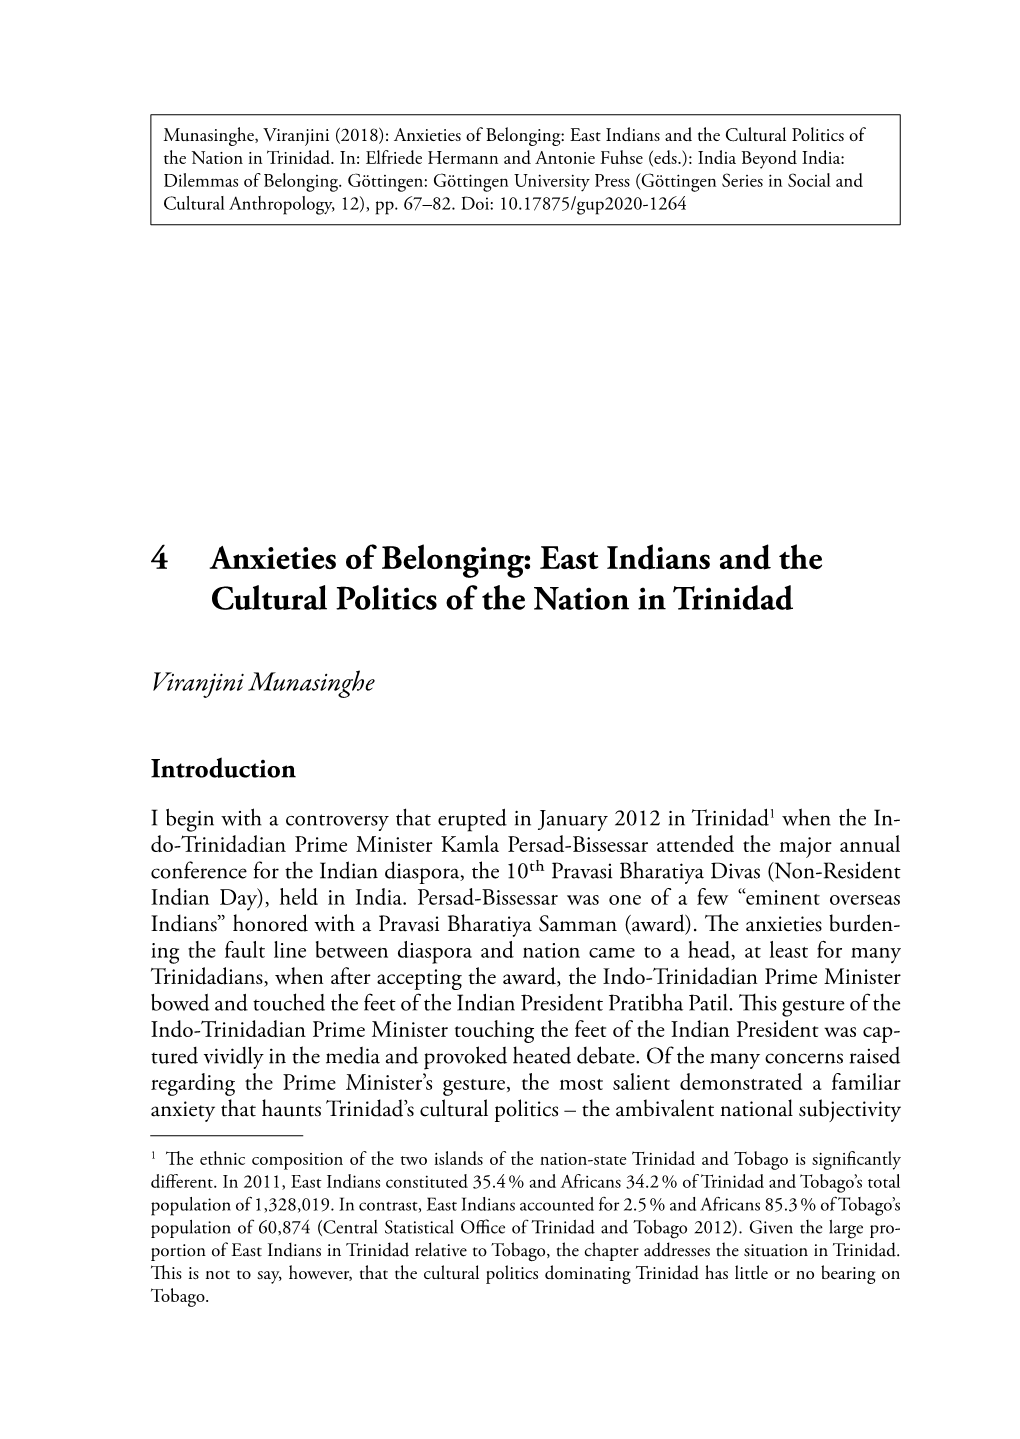 Anxieties of Belonging: East Indians and the 4 Cultural Politics of The